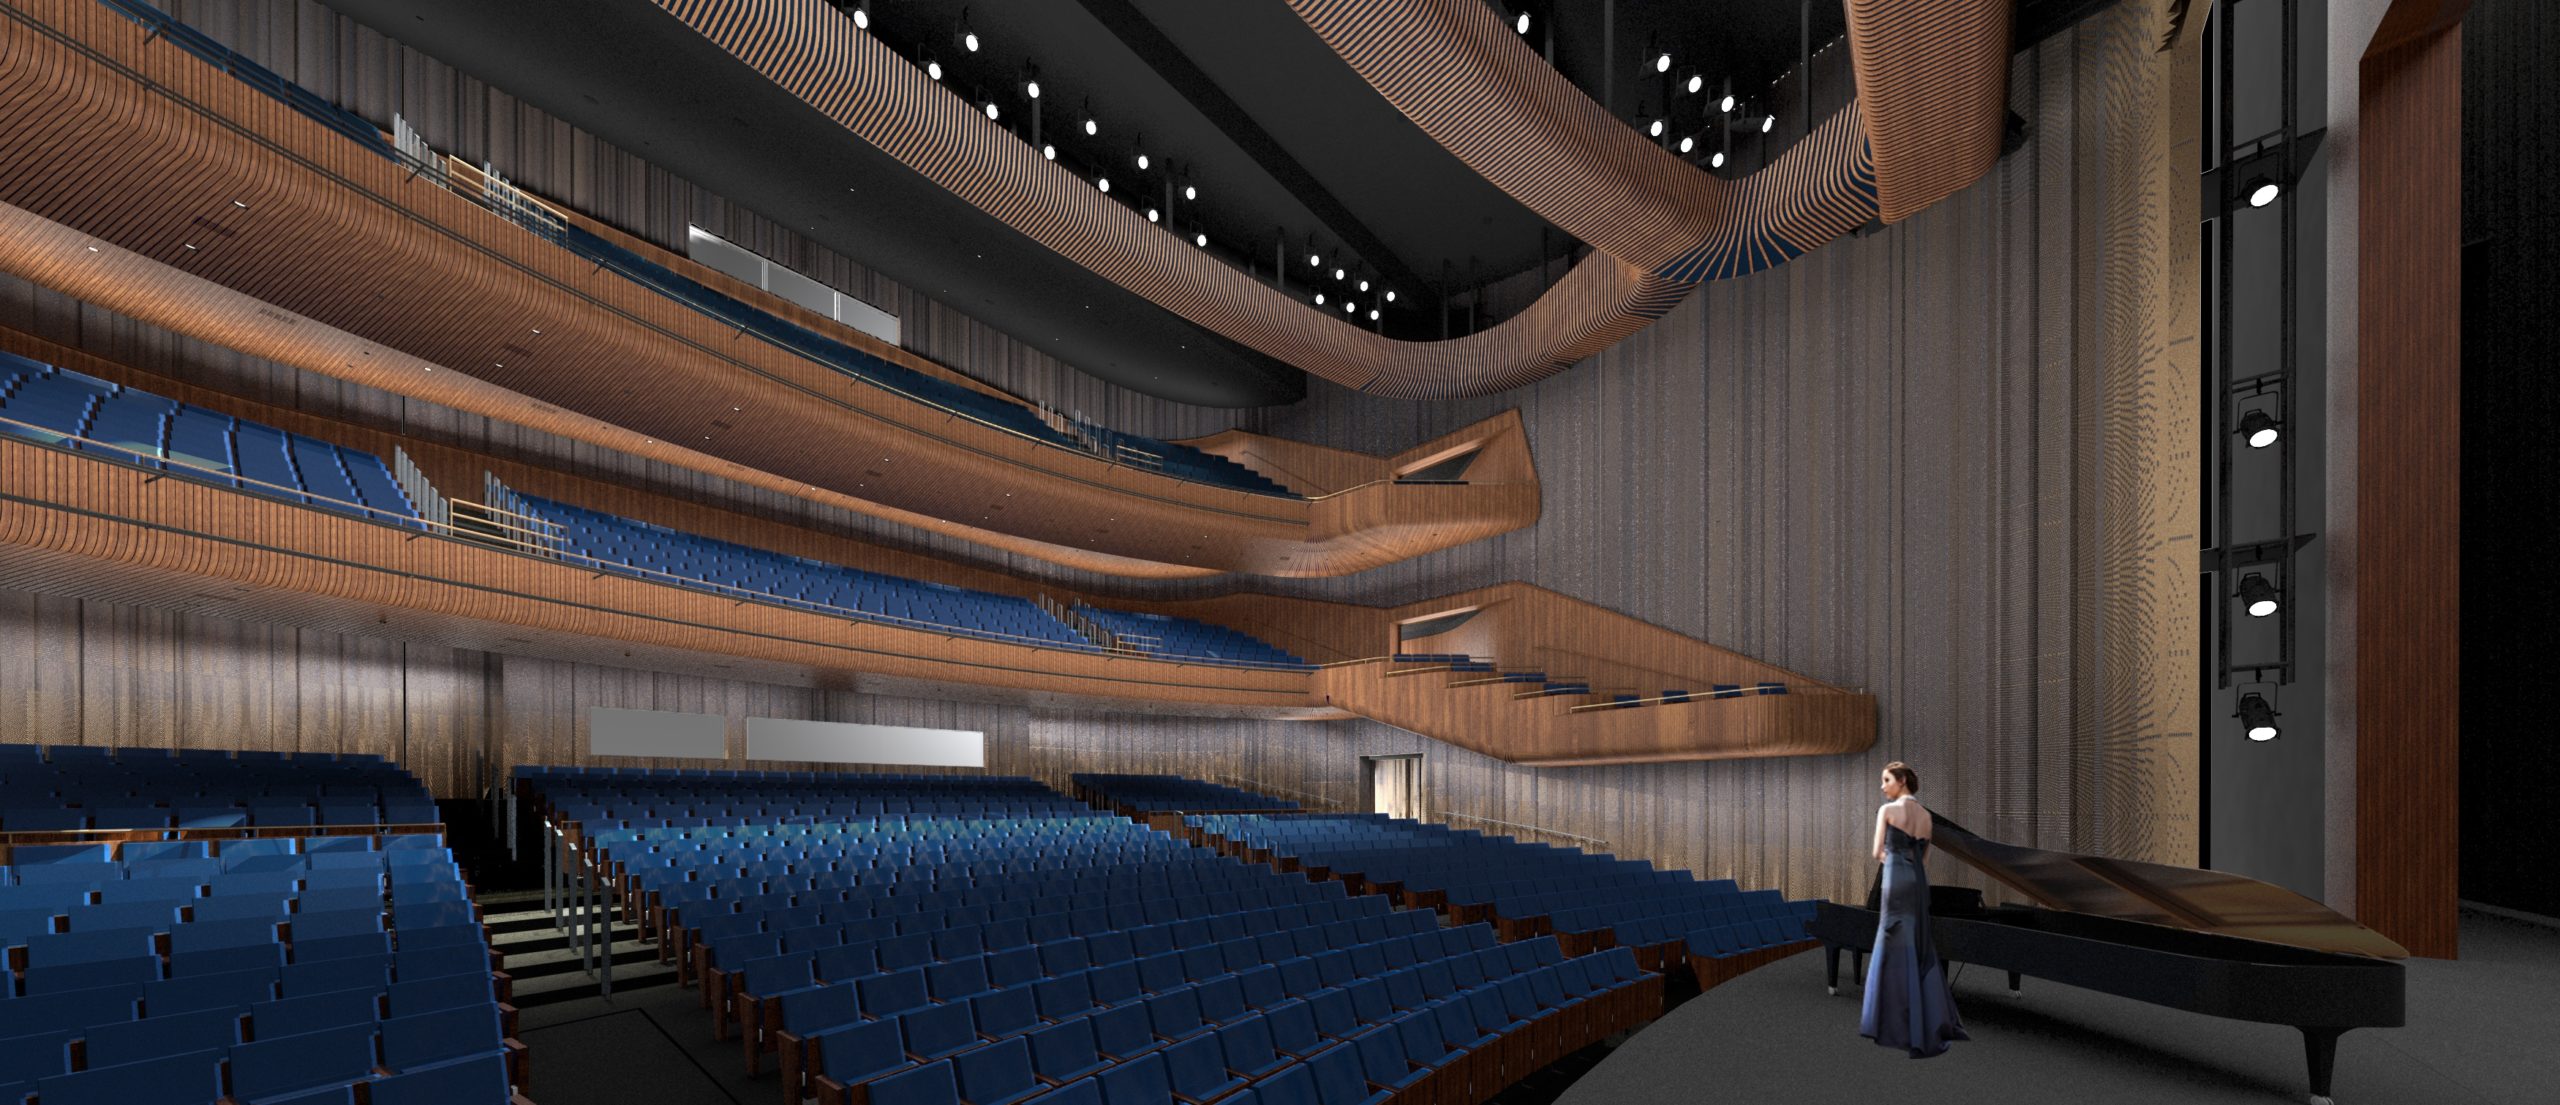 Synergi's mesh cladding featured throughout the main theatre of the Capital One Performing Arts Center